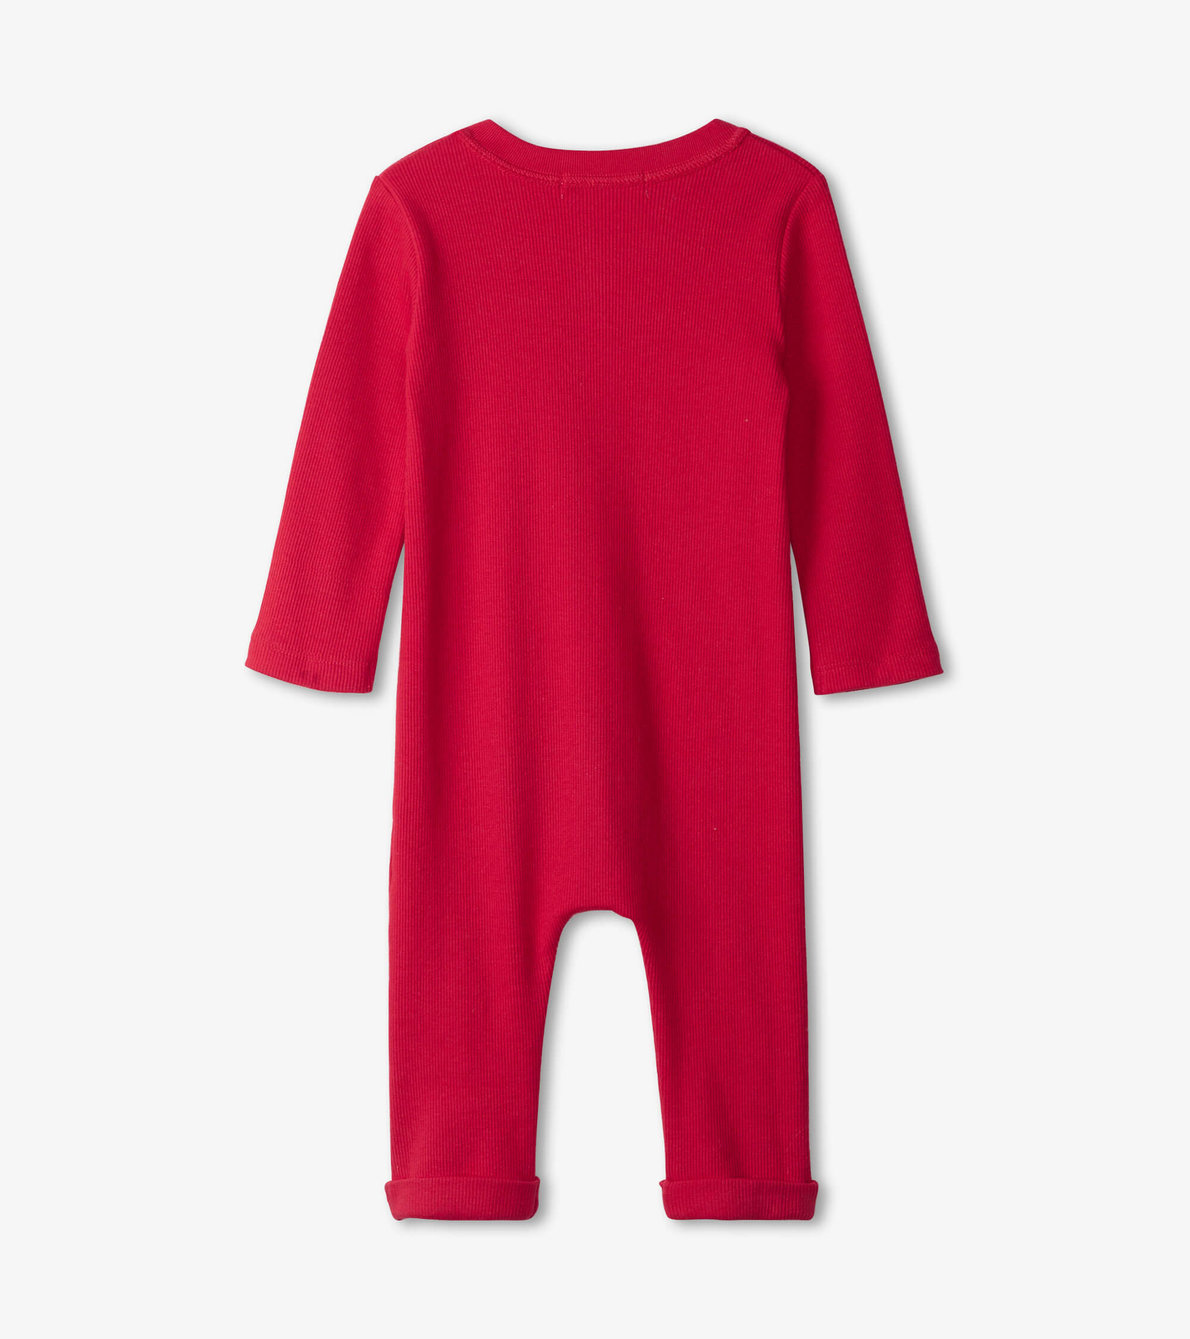 View larger image of Racing Red Plush Baby Henley Romper